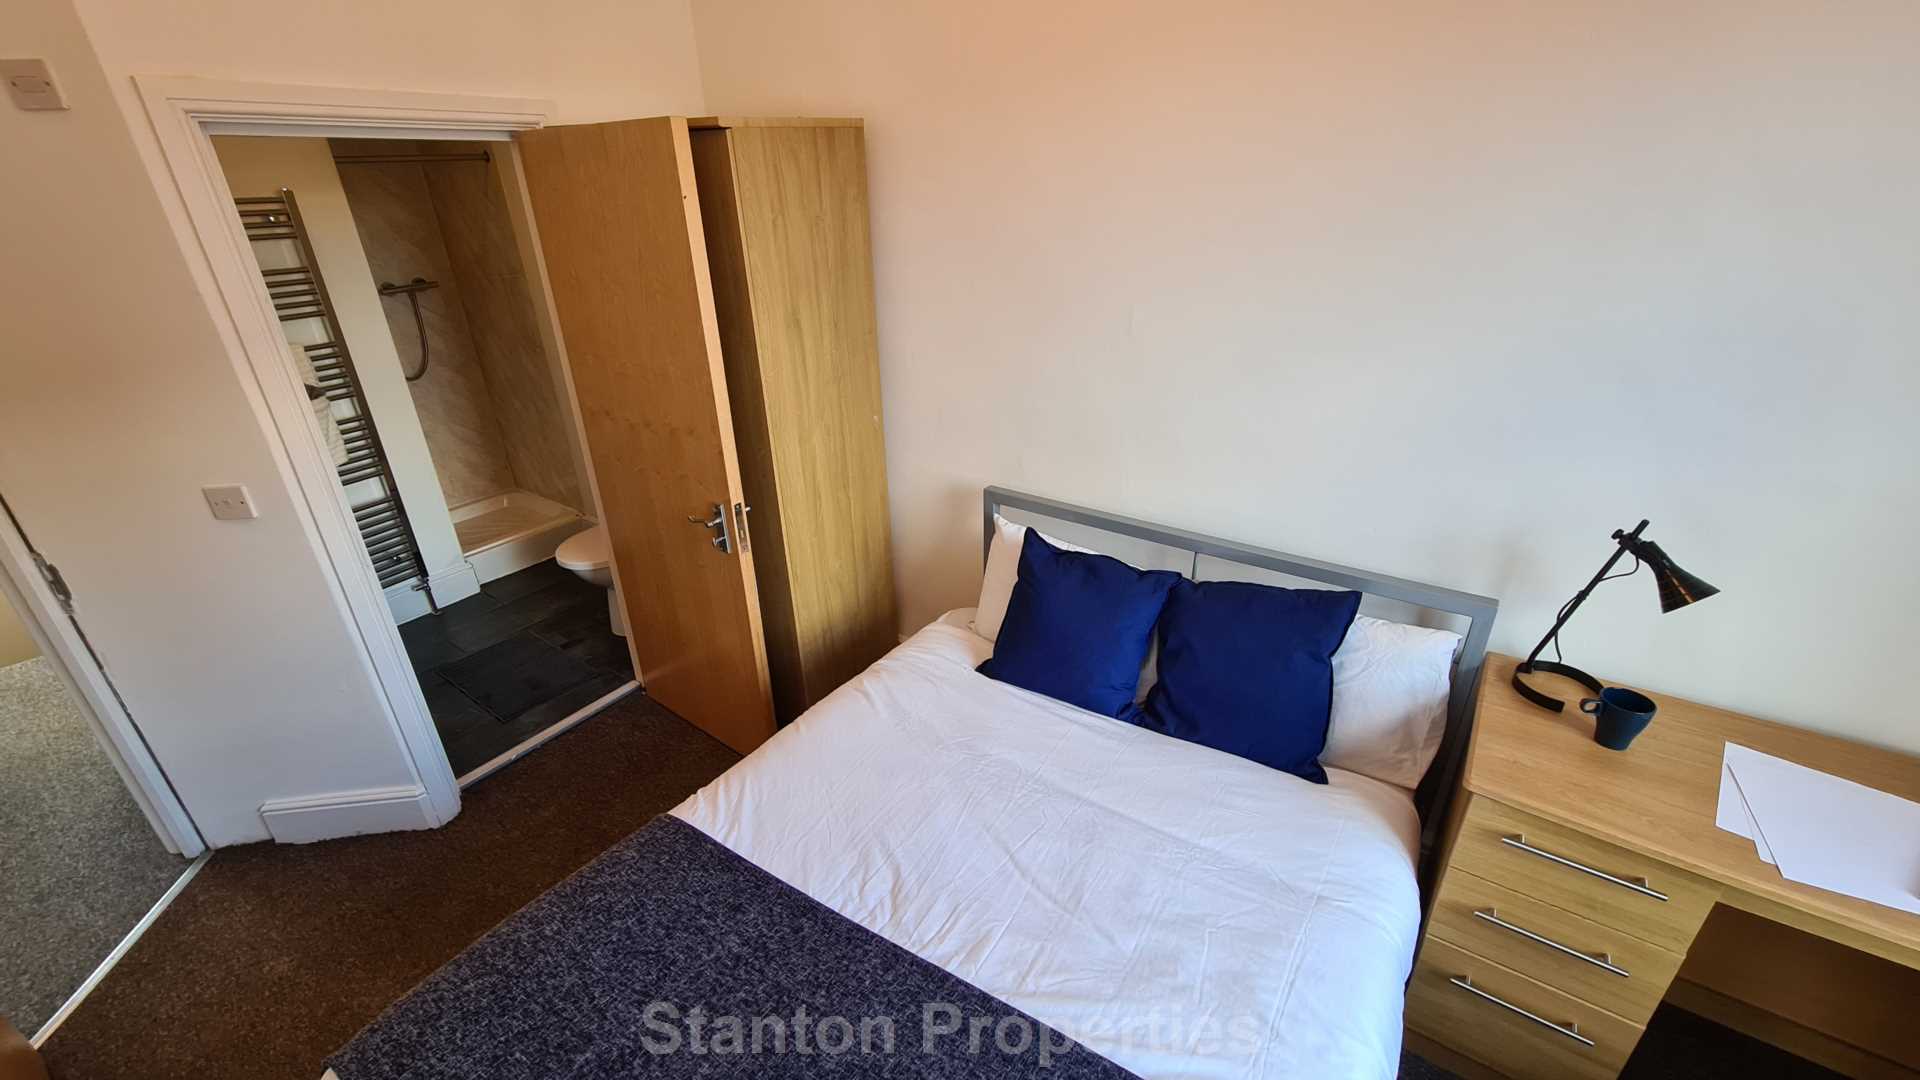 See Video Tour, £130 pppw, Albion Road, Manchester, Image 9